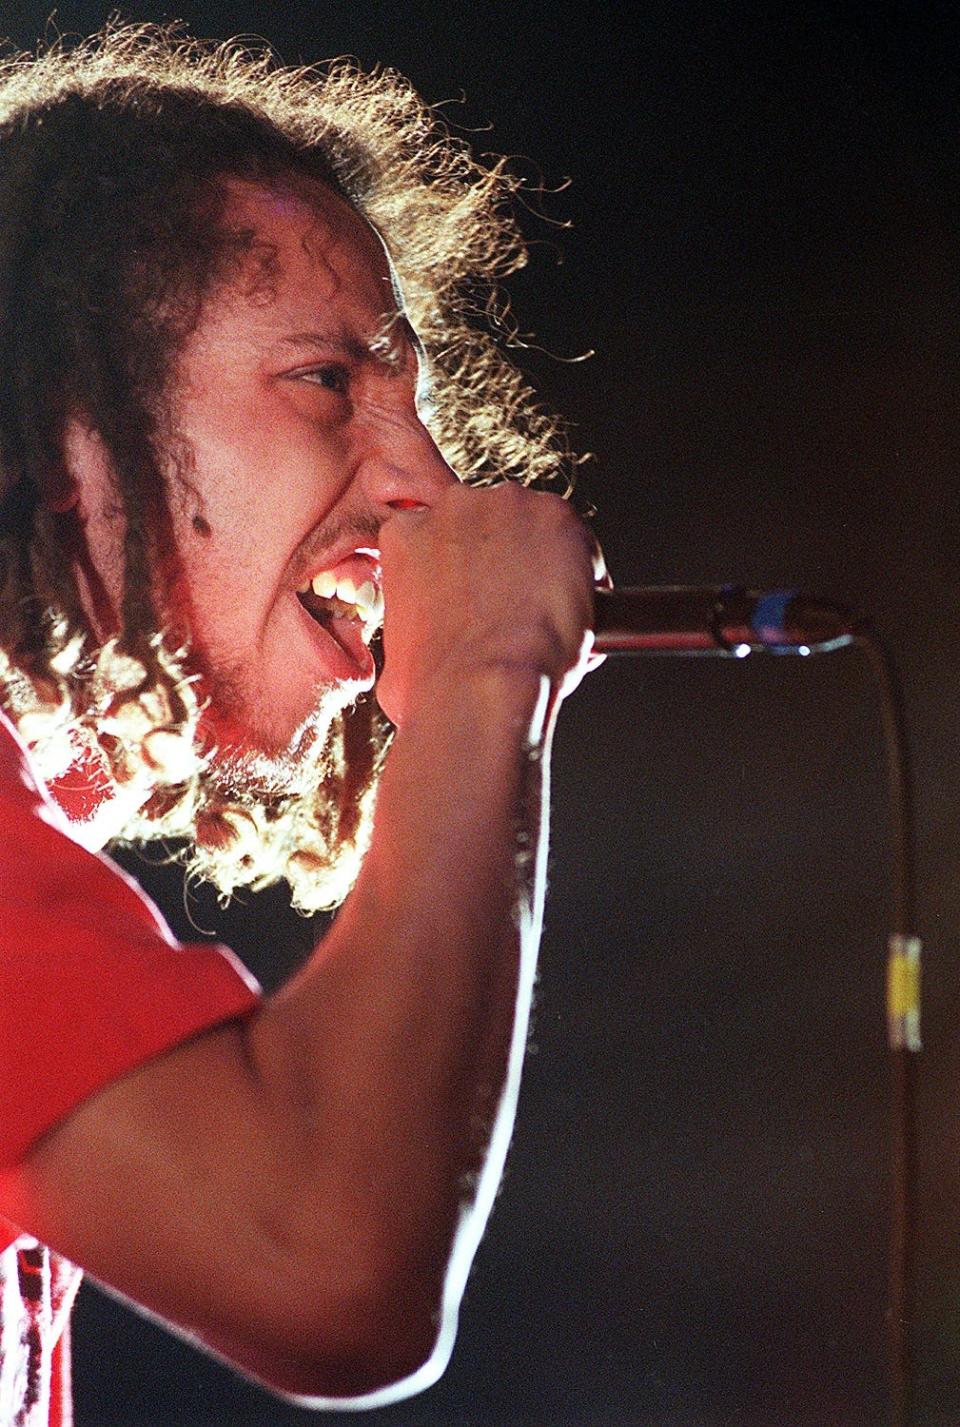 Zack de la Rocha of Rage Against the Machine announced Tuesday the band has to cancel the rest of its tour because of a personal injury.